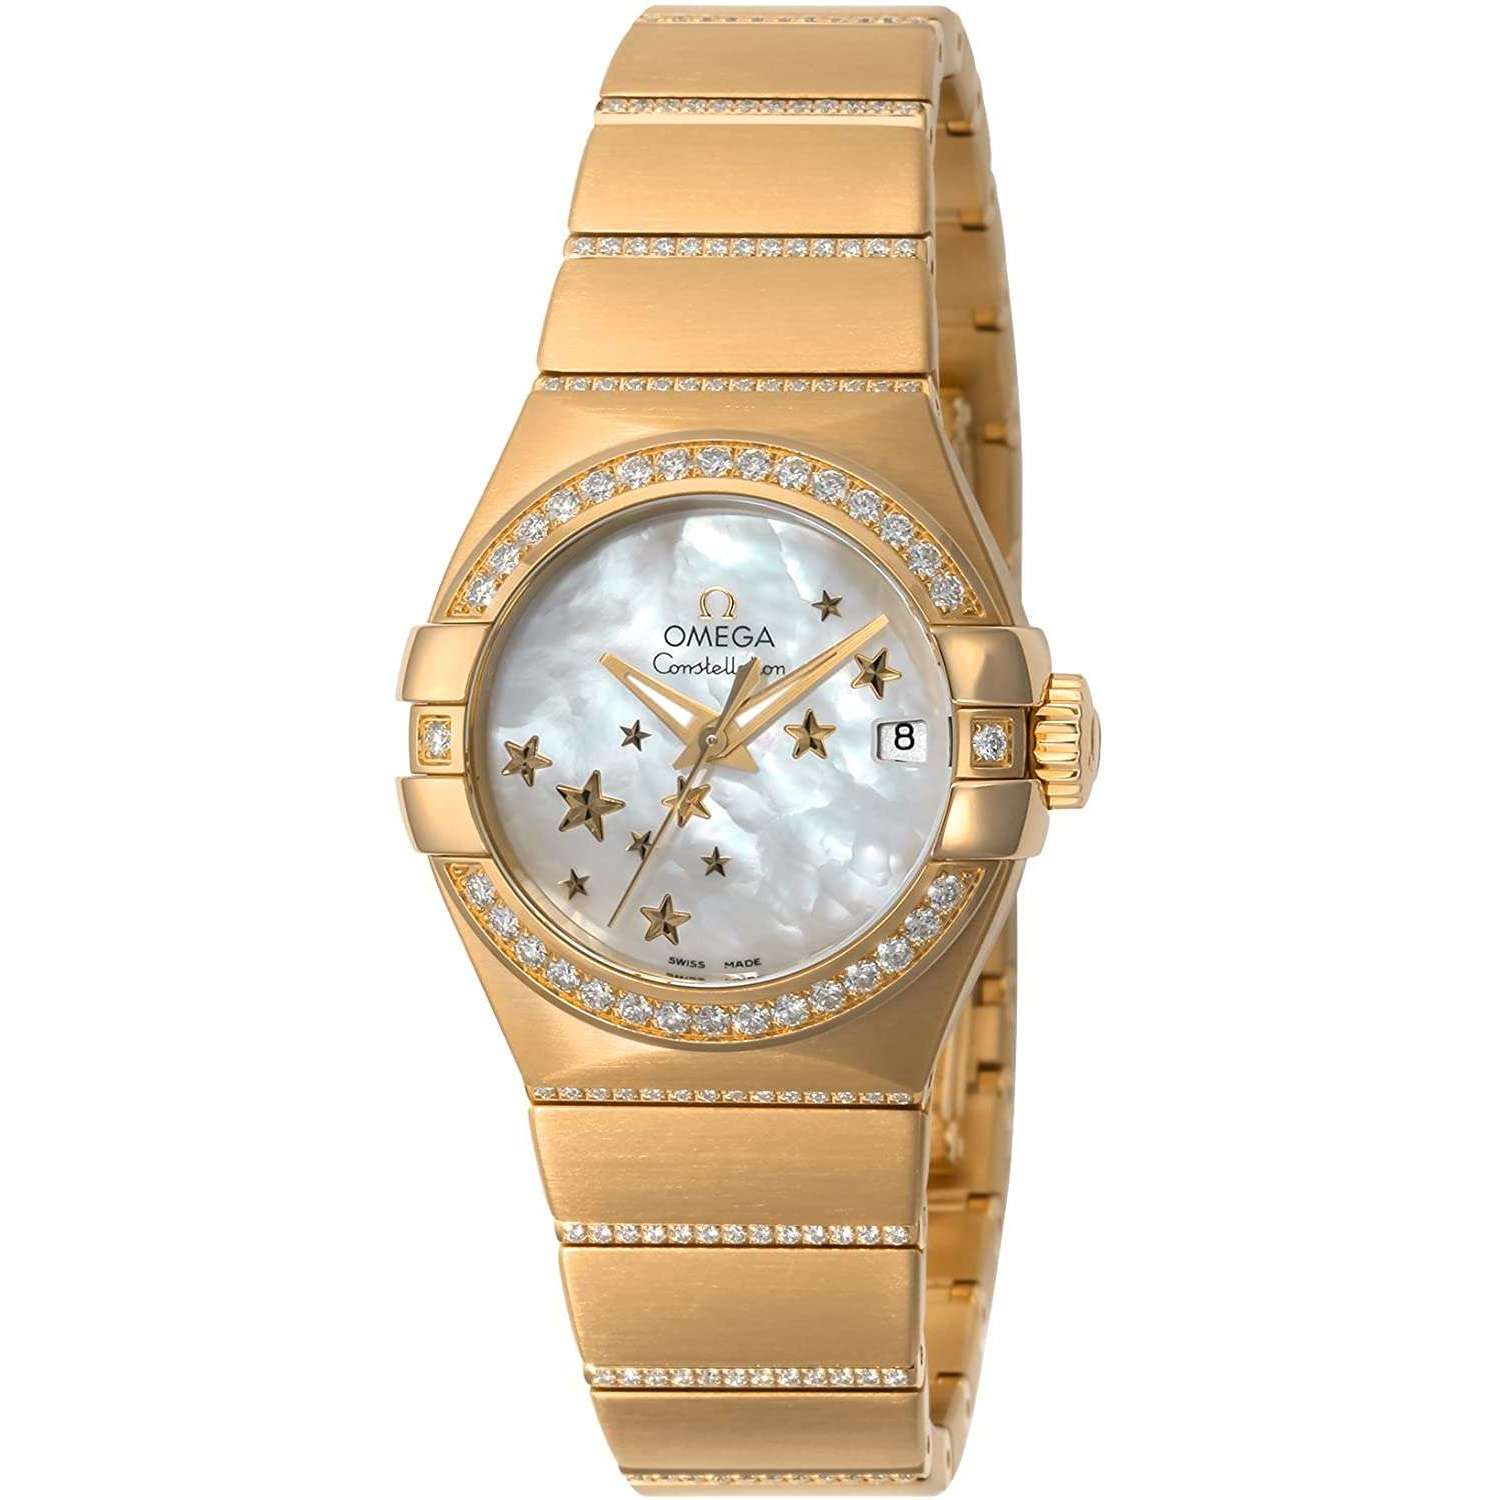 ROOK JAPAN:OMEGA CONSTELLATION CO‑AXIAL CHRONOMETER 27 MM WOMEN WATCH 123.55.27.20.05.002,Luxury Watch,Omega